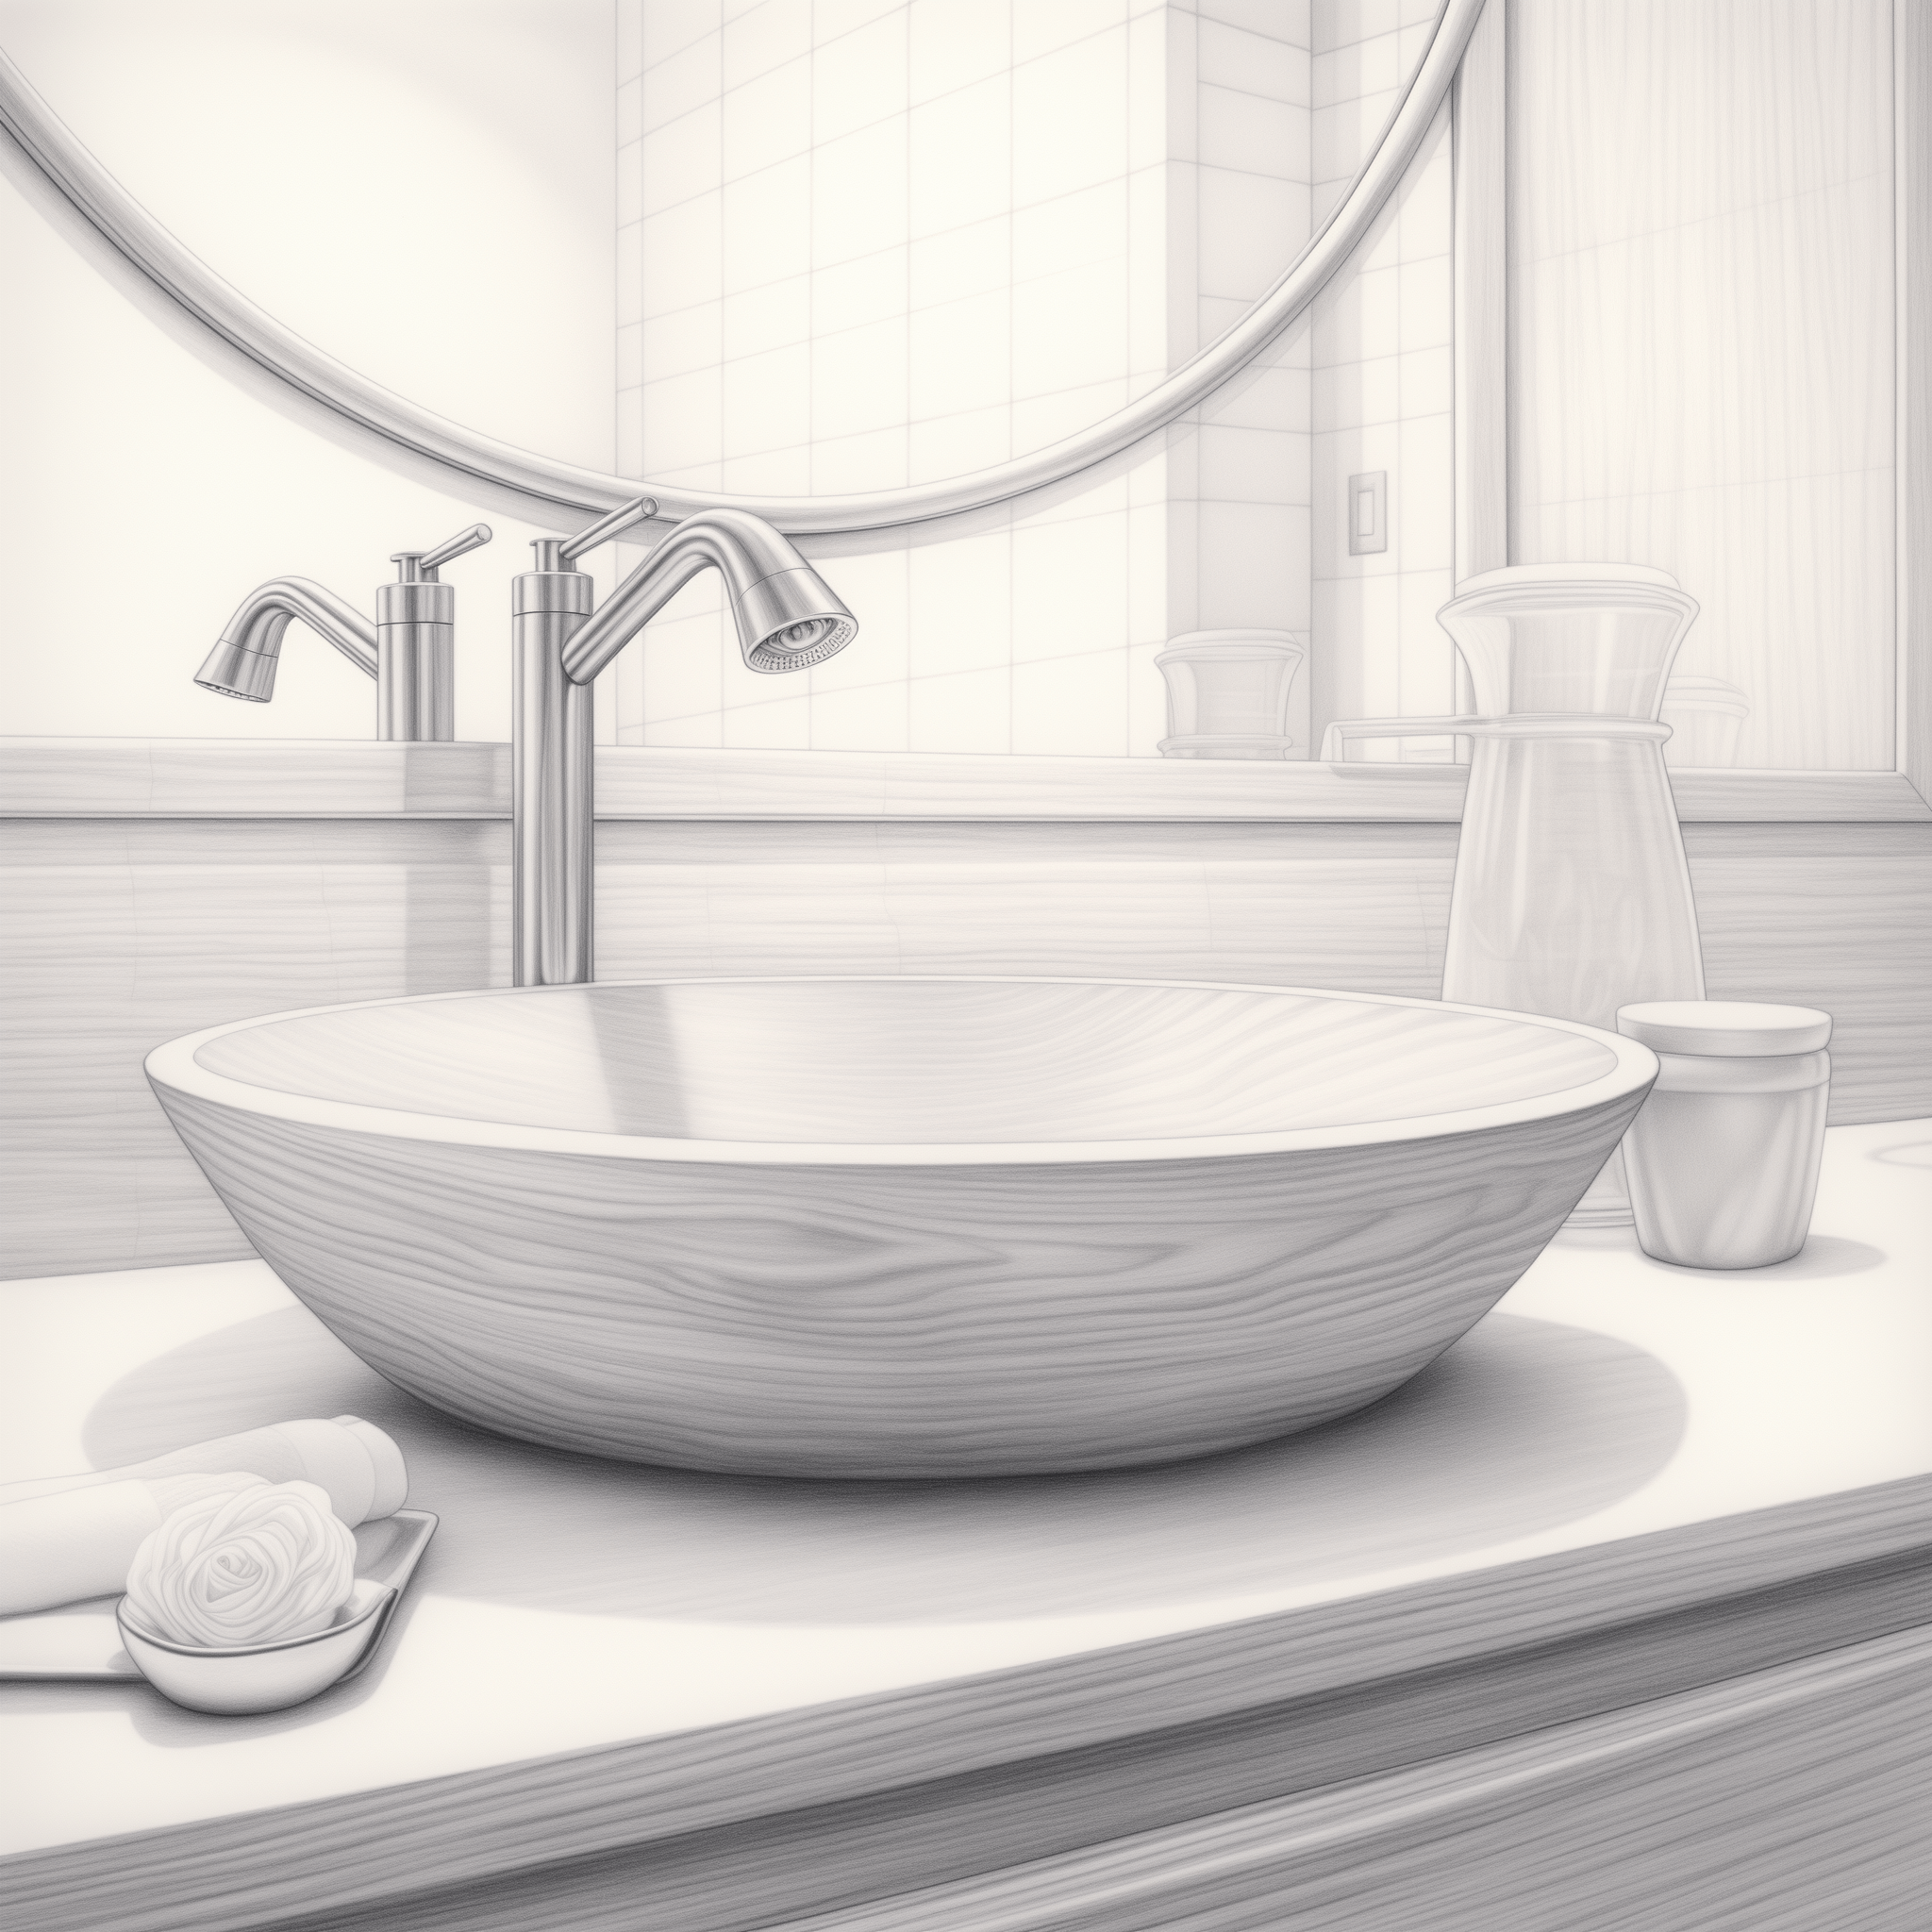 A Pencil Drawing of a luxury Vessel Sink